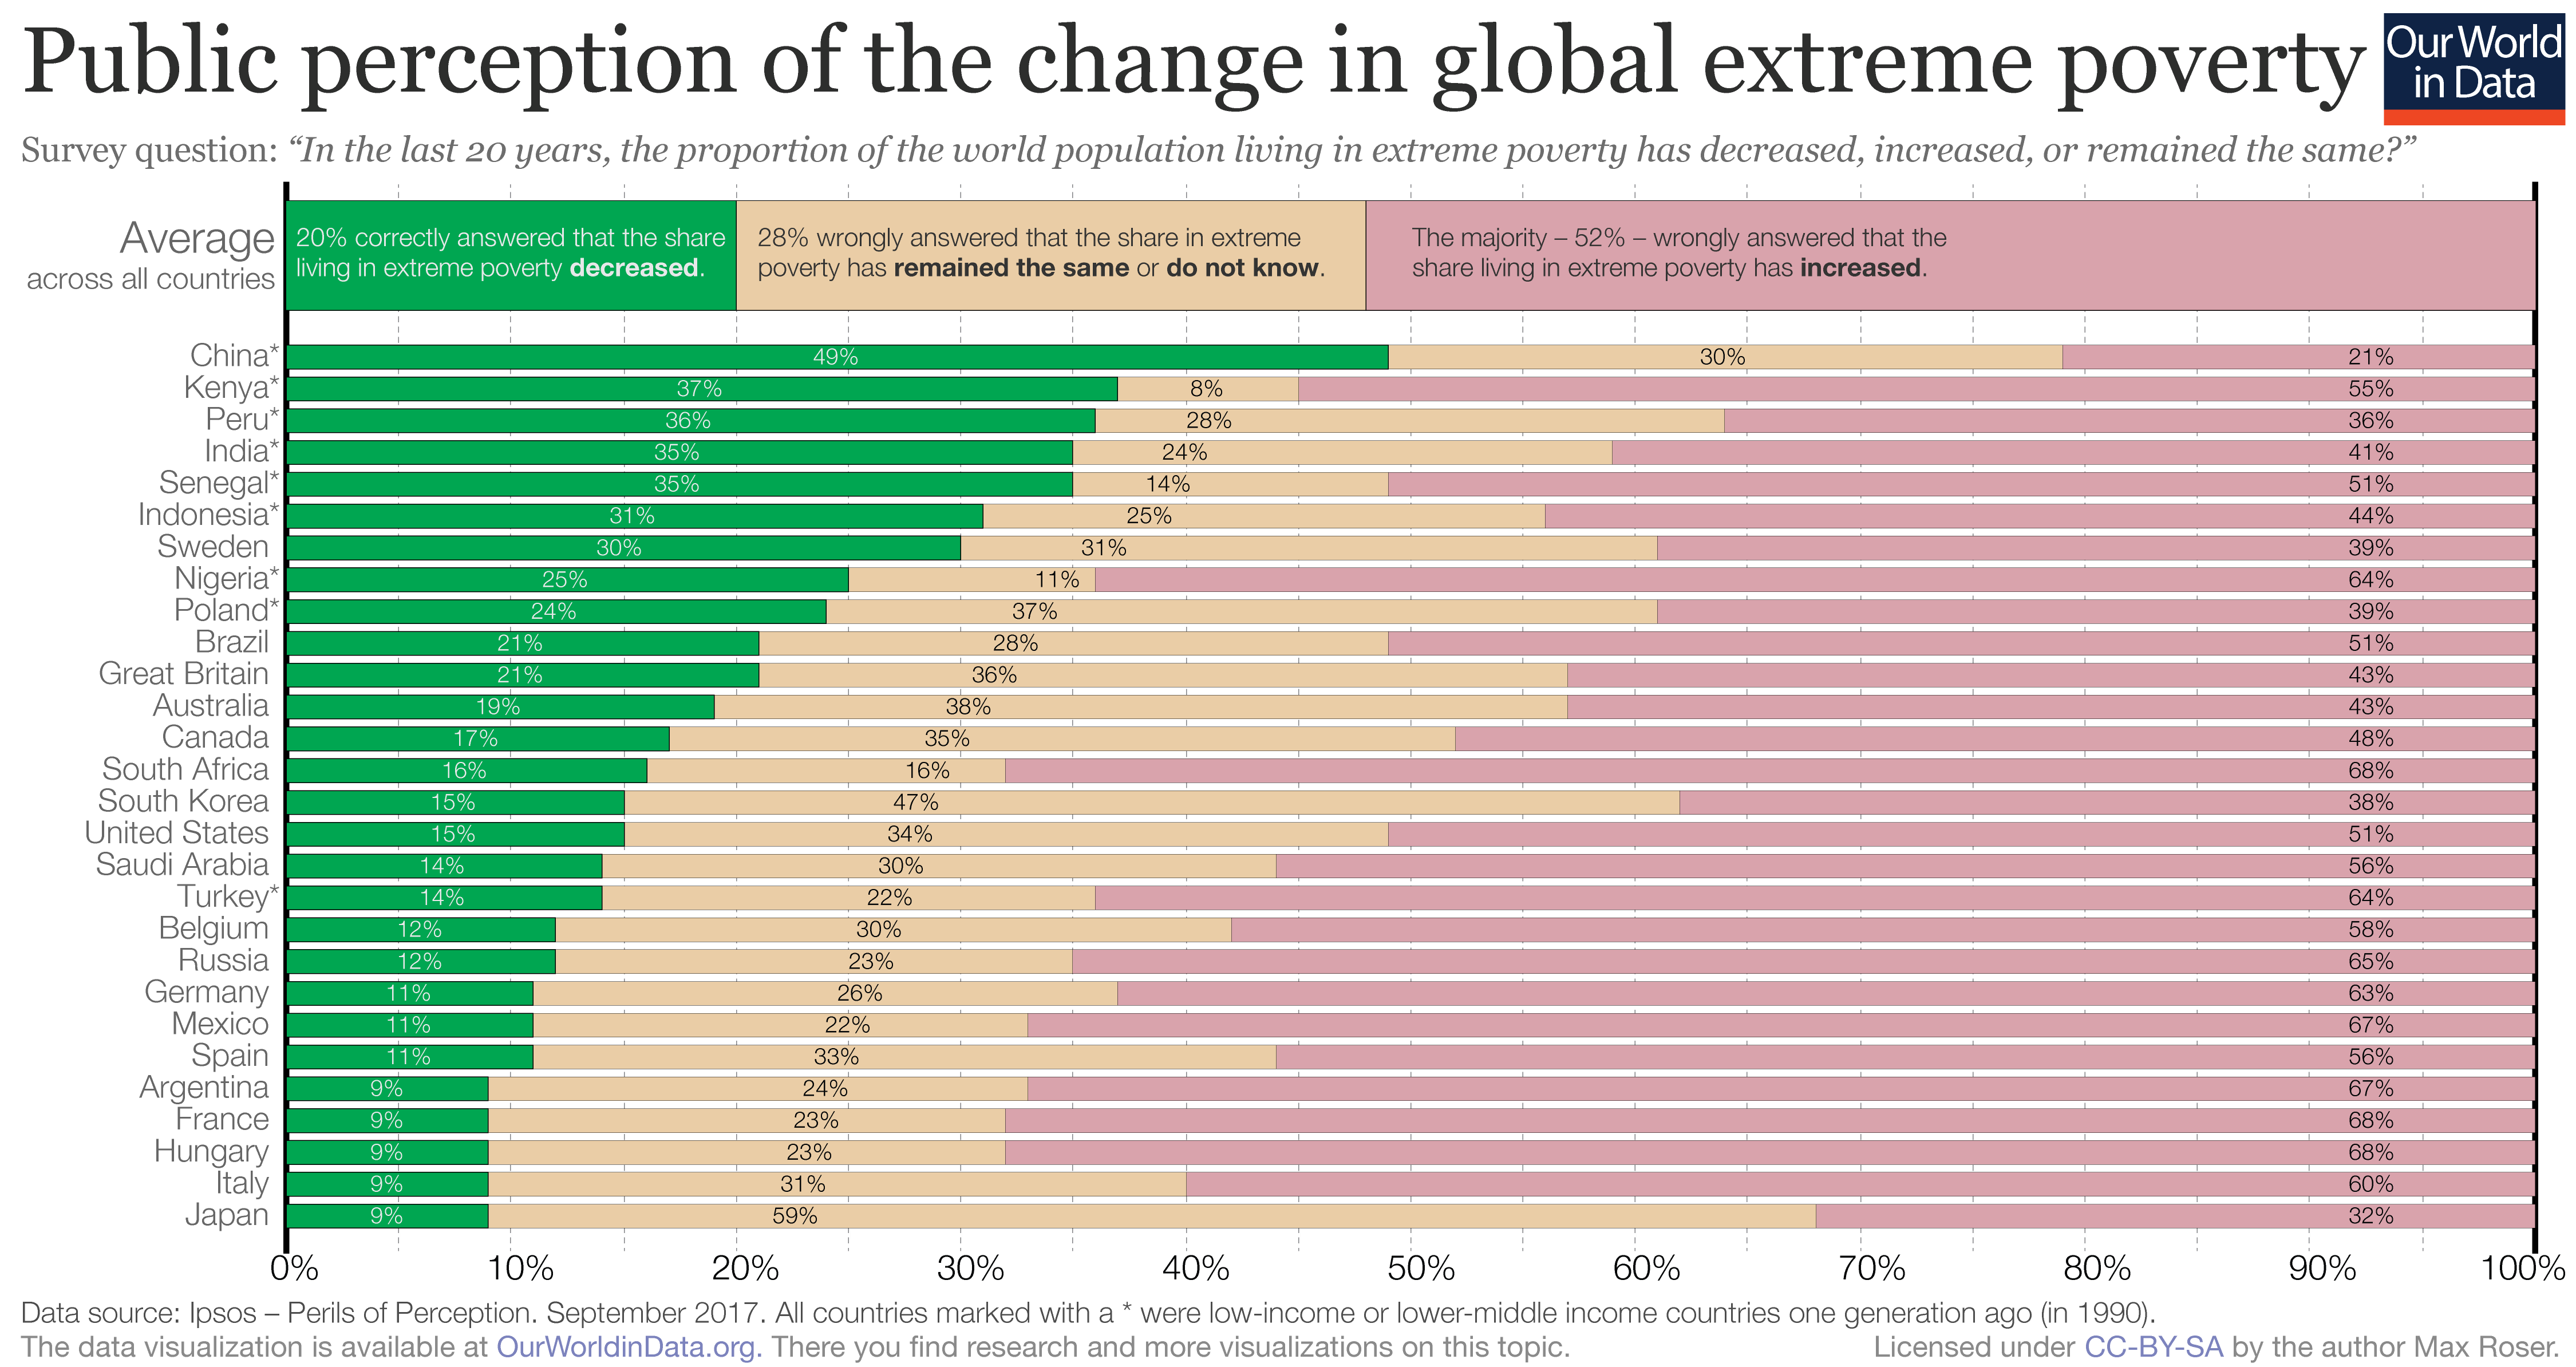 Stacked bar chart of the share of people that think global extreme poverty has got better or worse, showing that most people incorrectly think it has stayed the same or gotten worse.